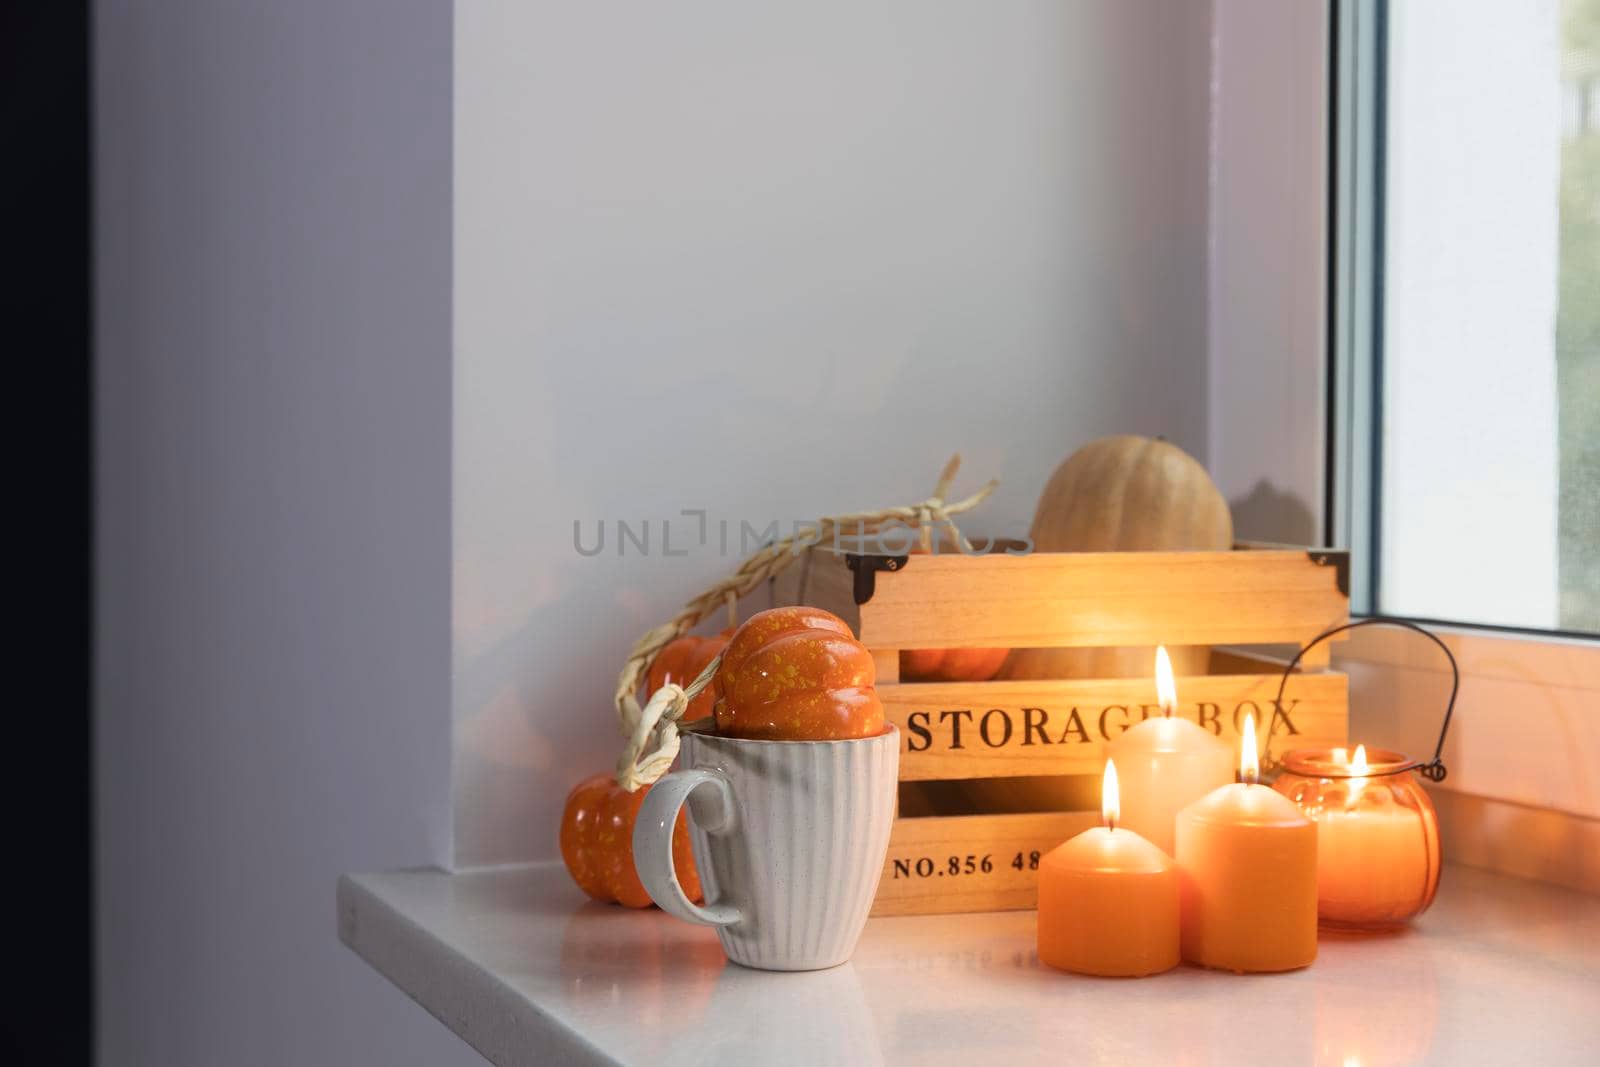 Preparing your home for Halloween. A wooden pumpkin box, faux pumpkin garland, orange candles, a cup of tea and a candle lantern decorate the window. by elenarostunova